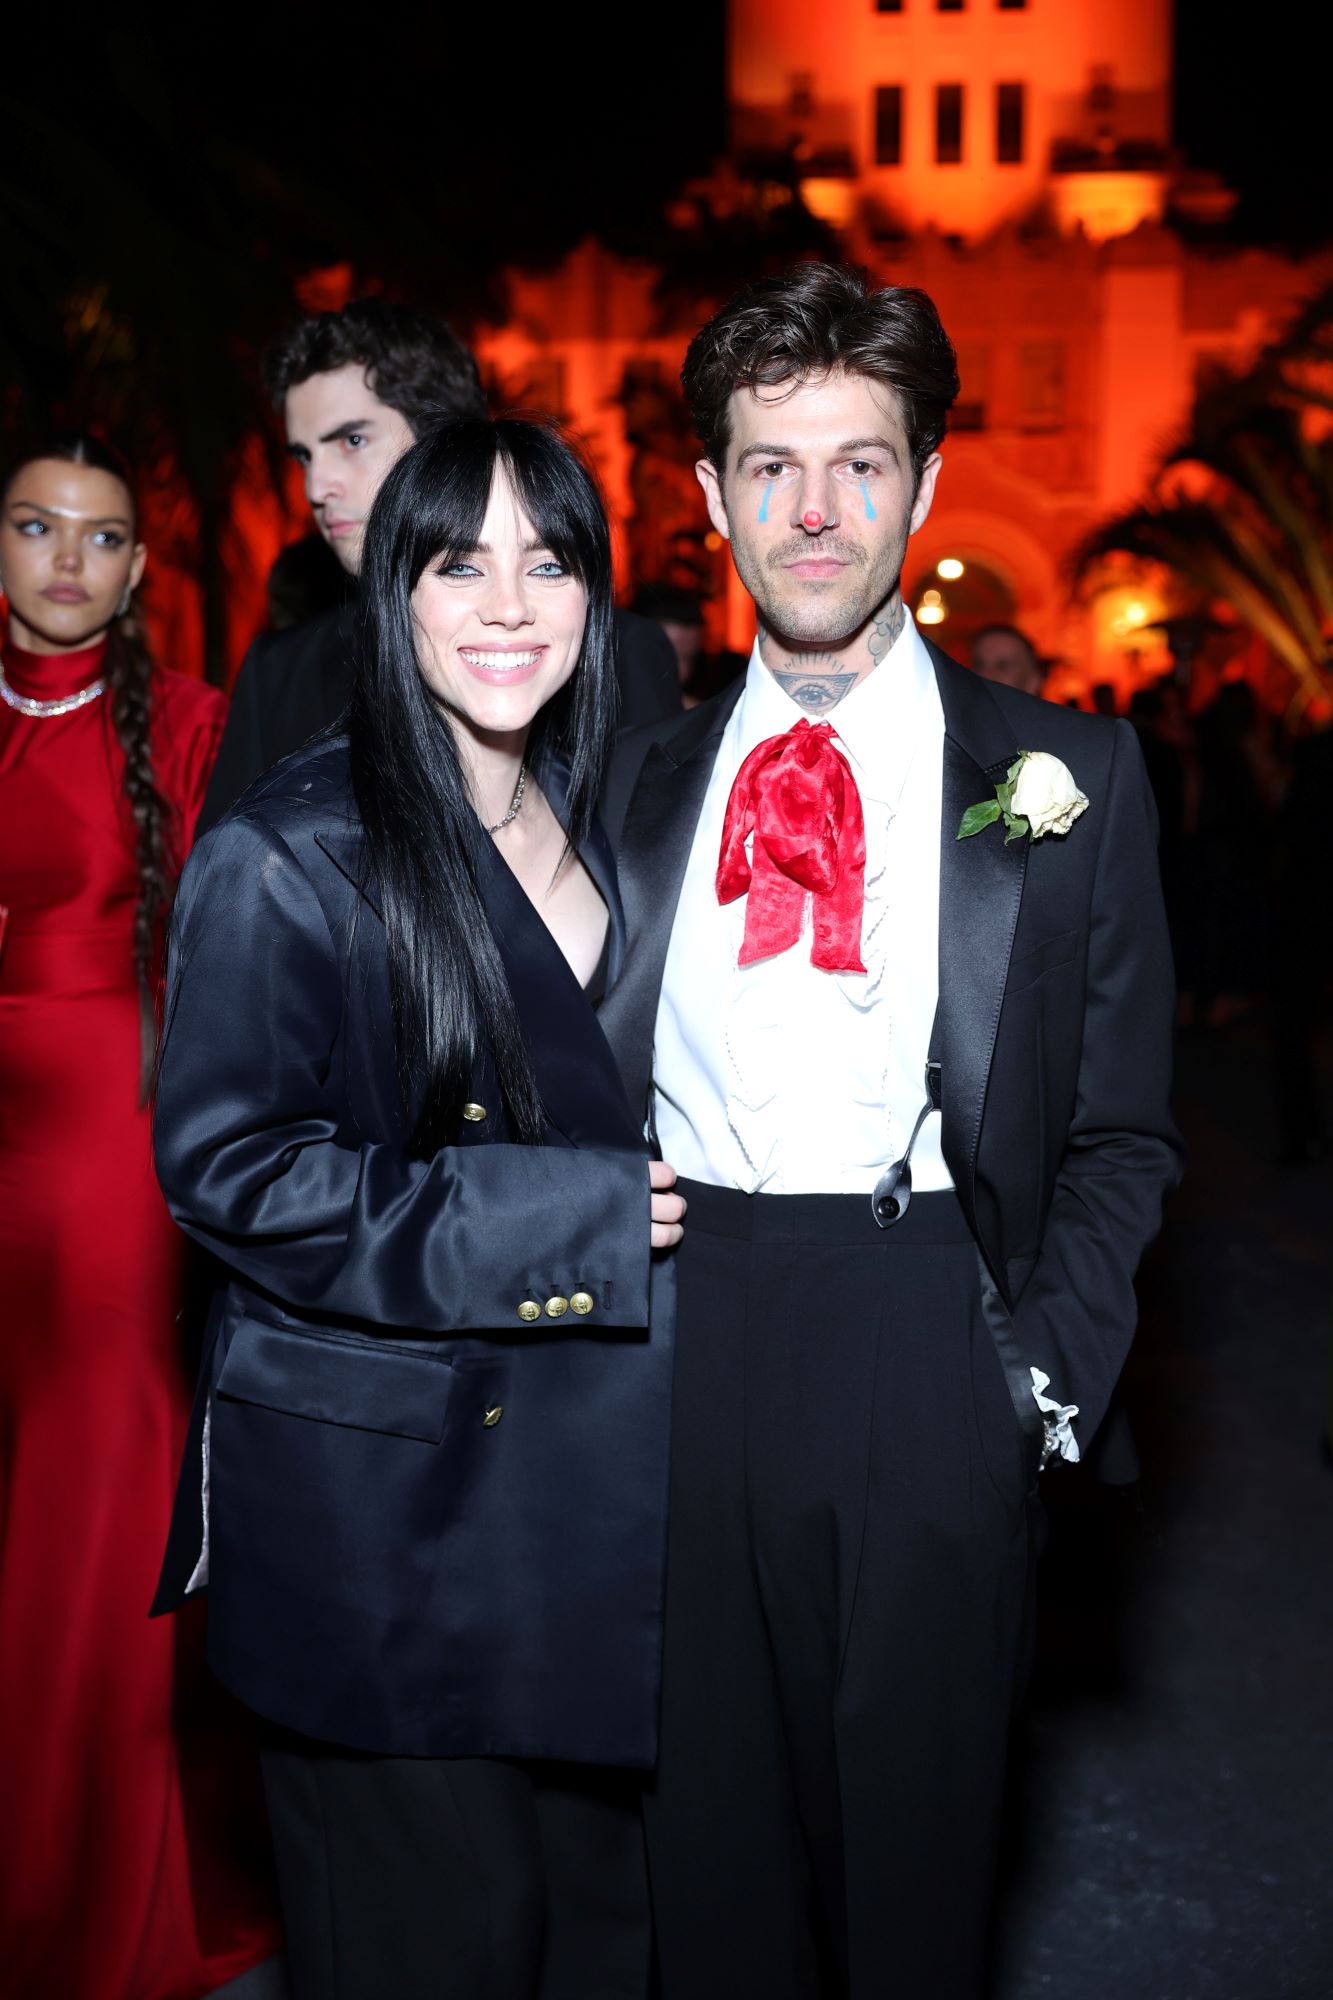 Jesse Rutherford and Billie Eilish at the Vanity Fair Oscar Party on March 12, 2023, in Beverly Hills. | Source: Getty Images